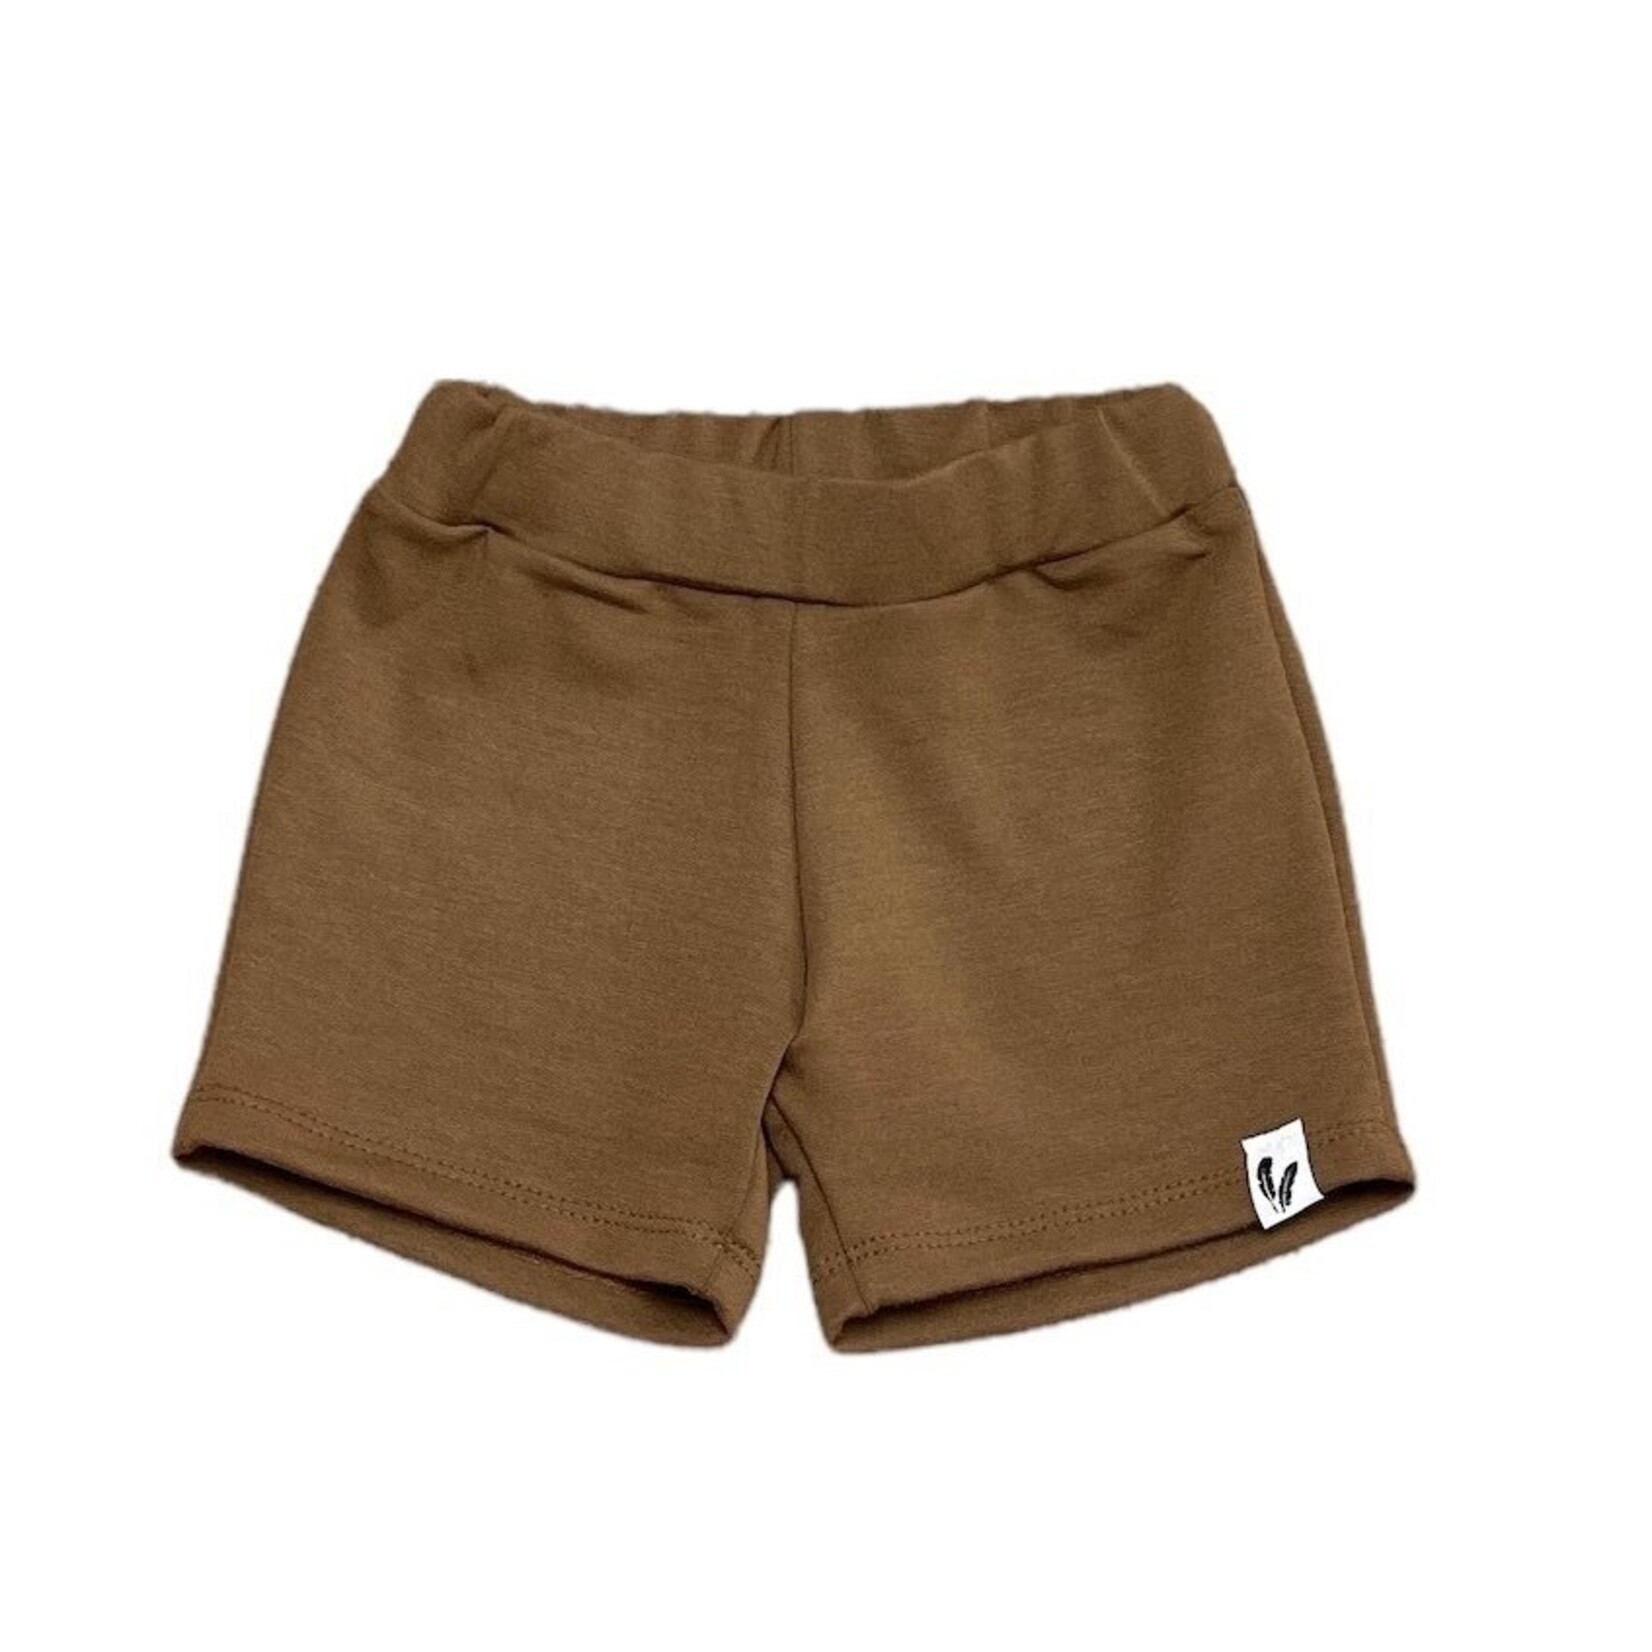 Feathers® Short - Brown